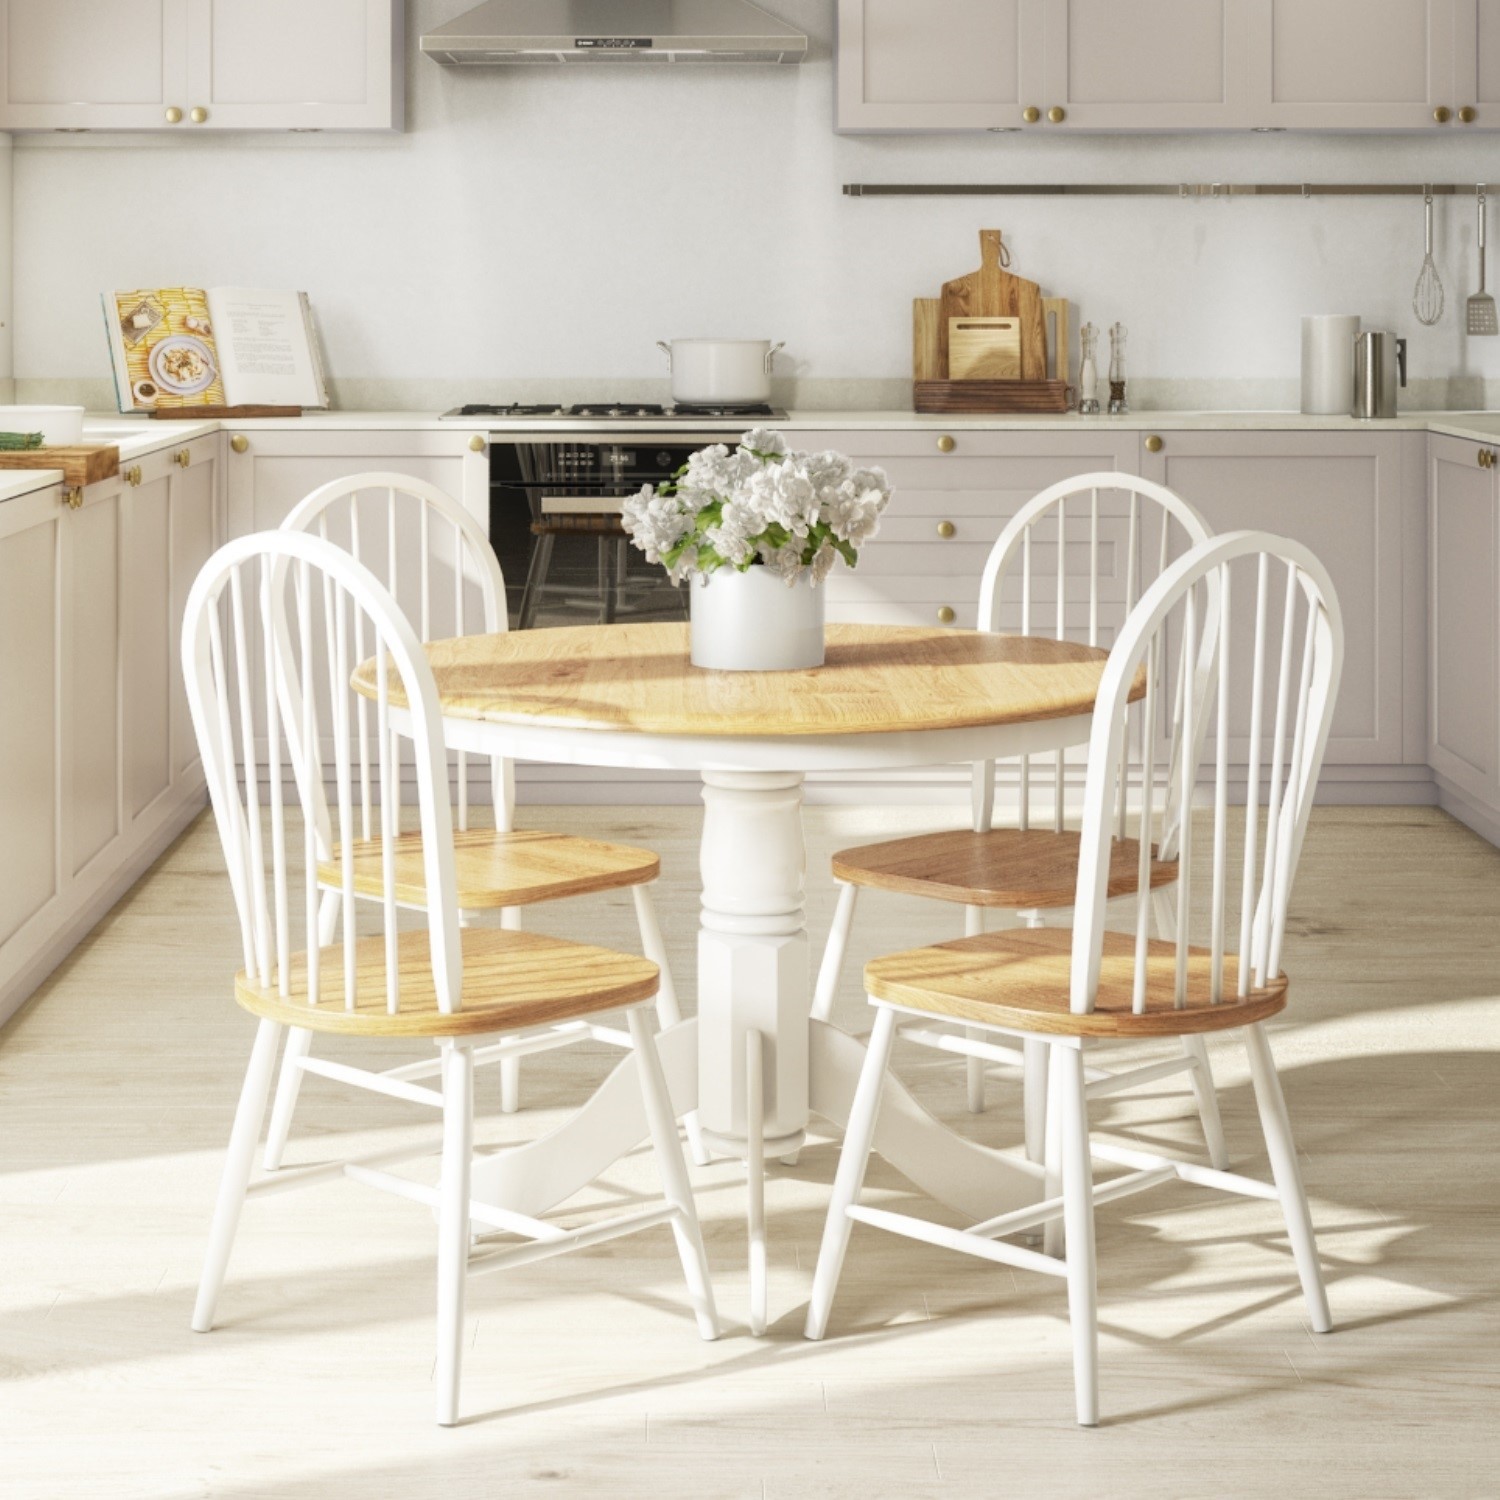 Rhode Island Natural White Round Kitchen Dining Table And 4